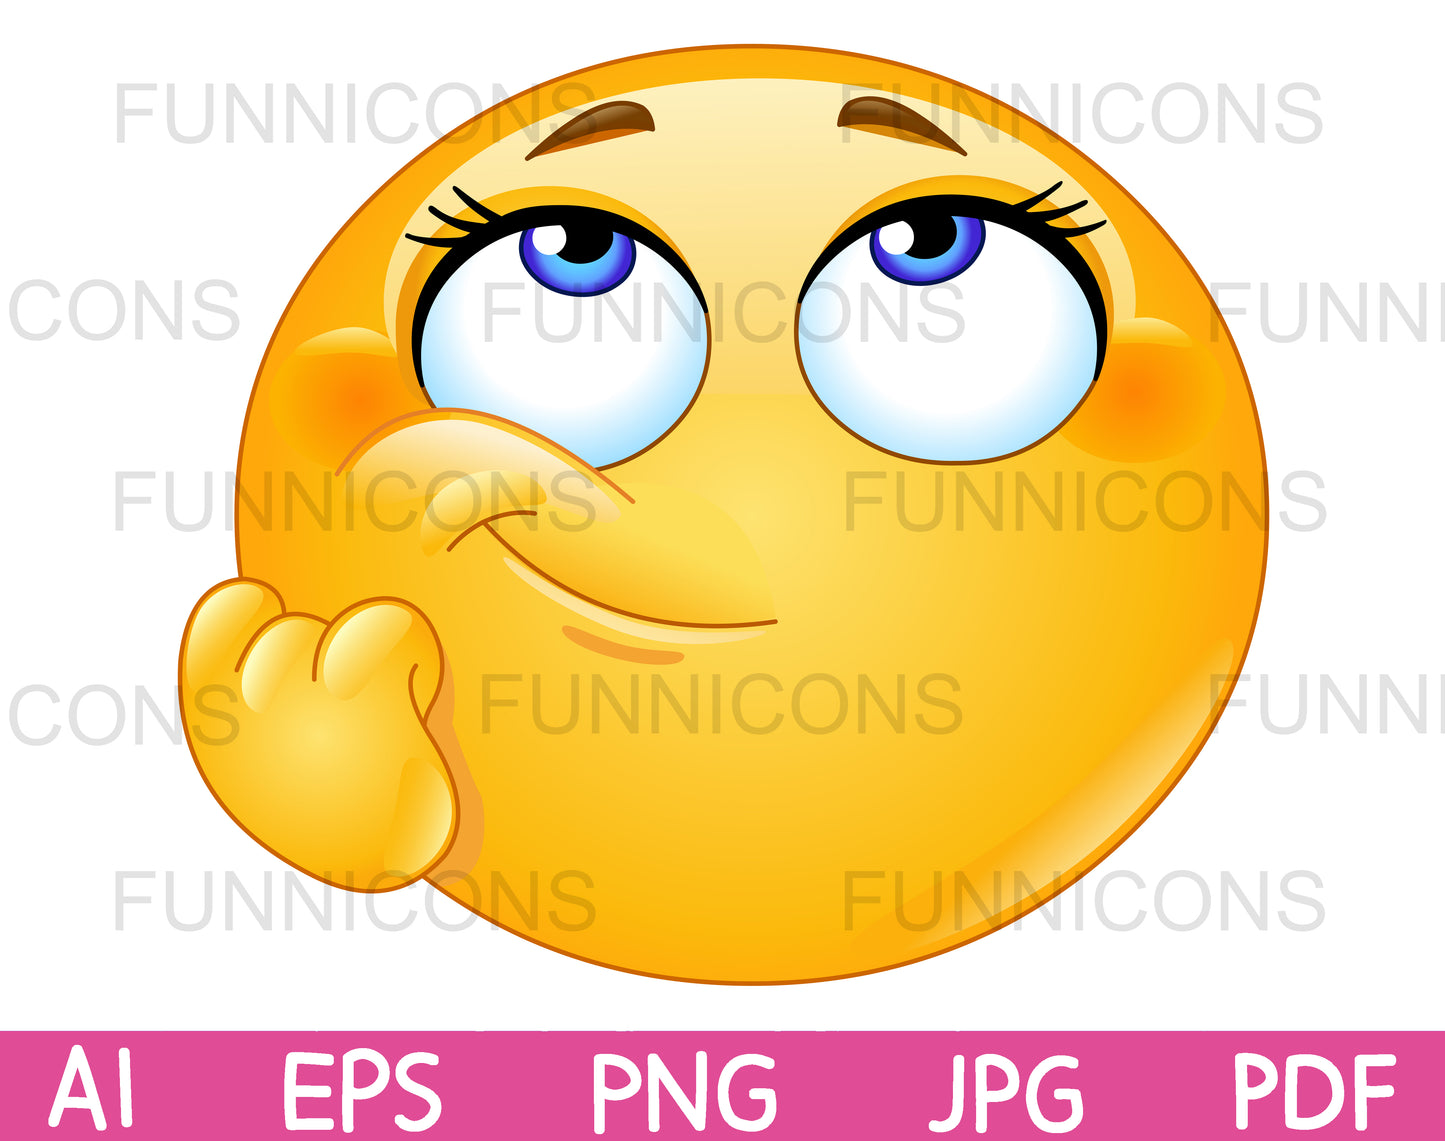 Female Emoji Making a Ponder, Think or Day Dreaming Gesture with her Hand on Cheek